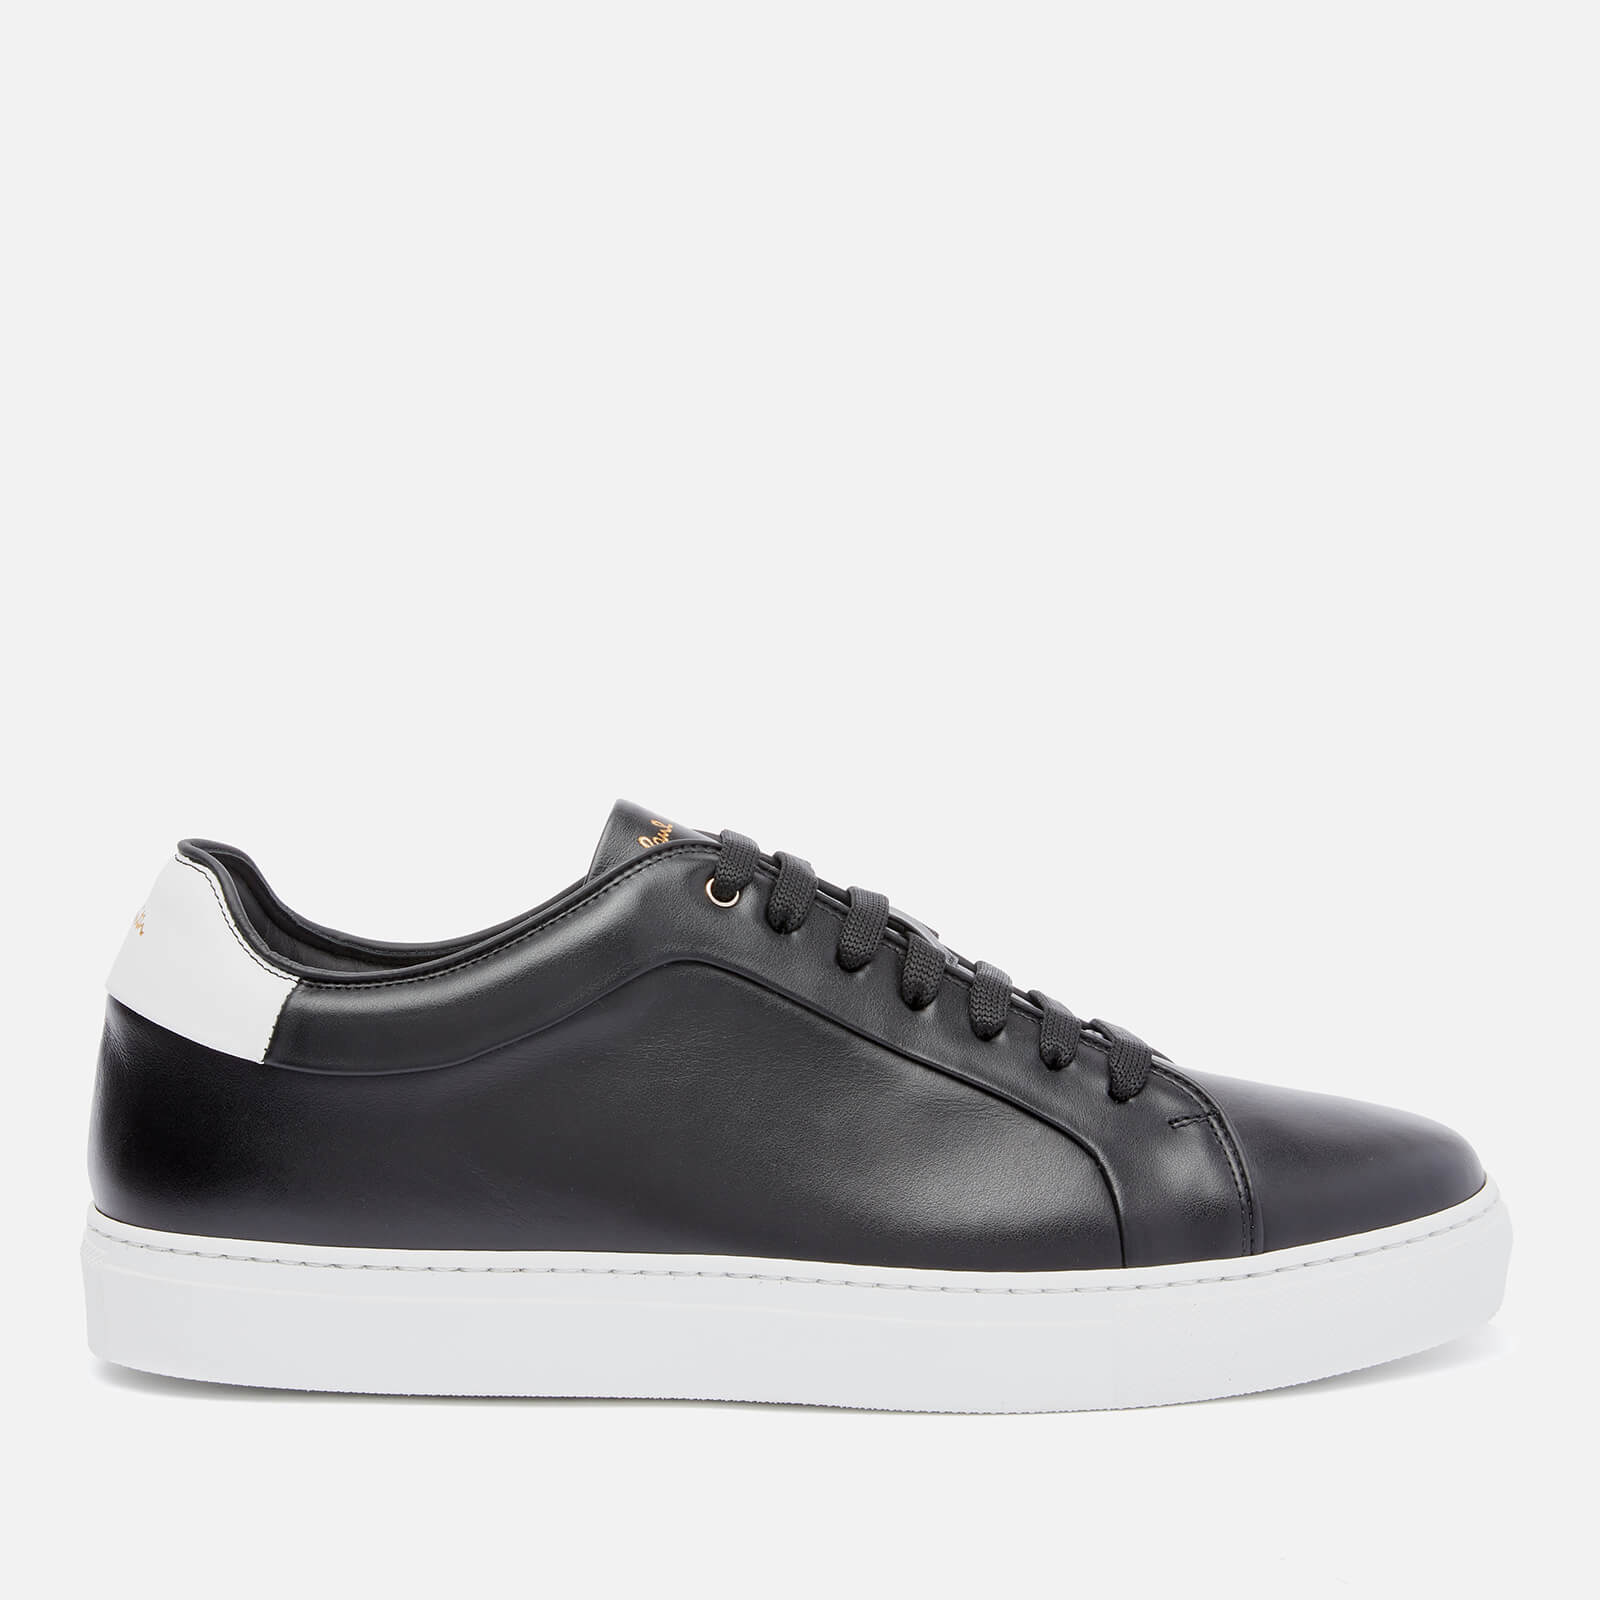 Paul Smith Men's Basso Leather Cupsole Trainers - Black - UK 10